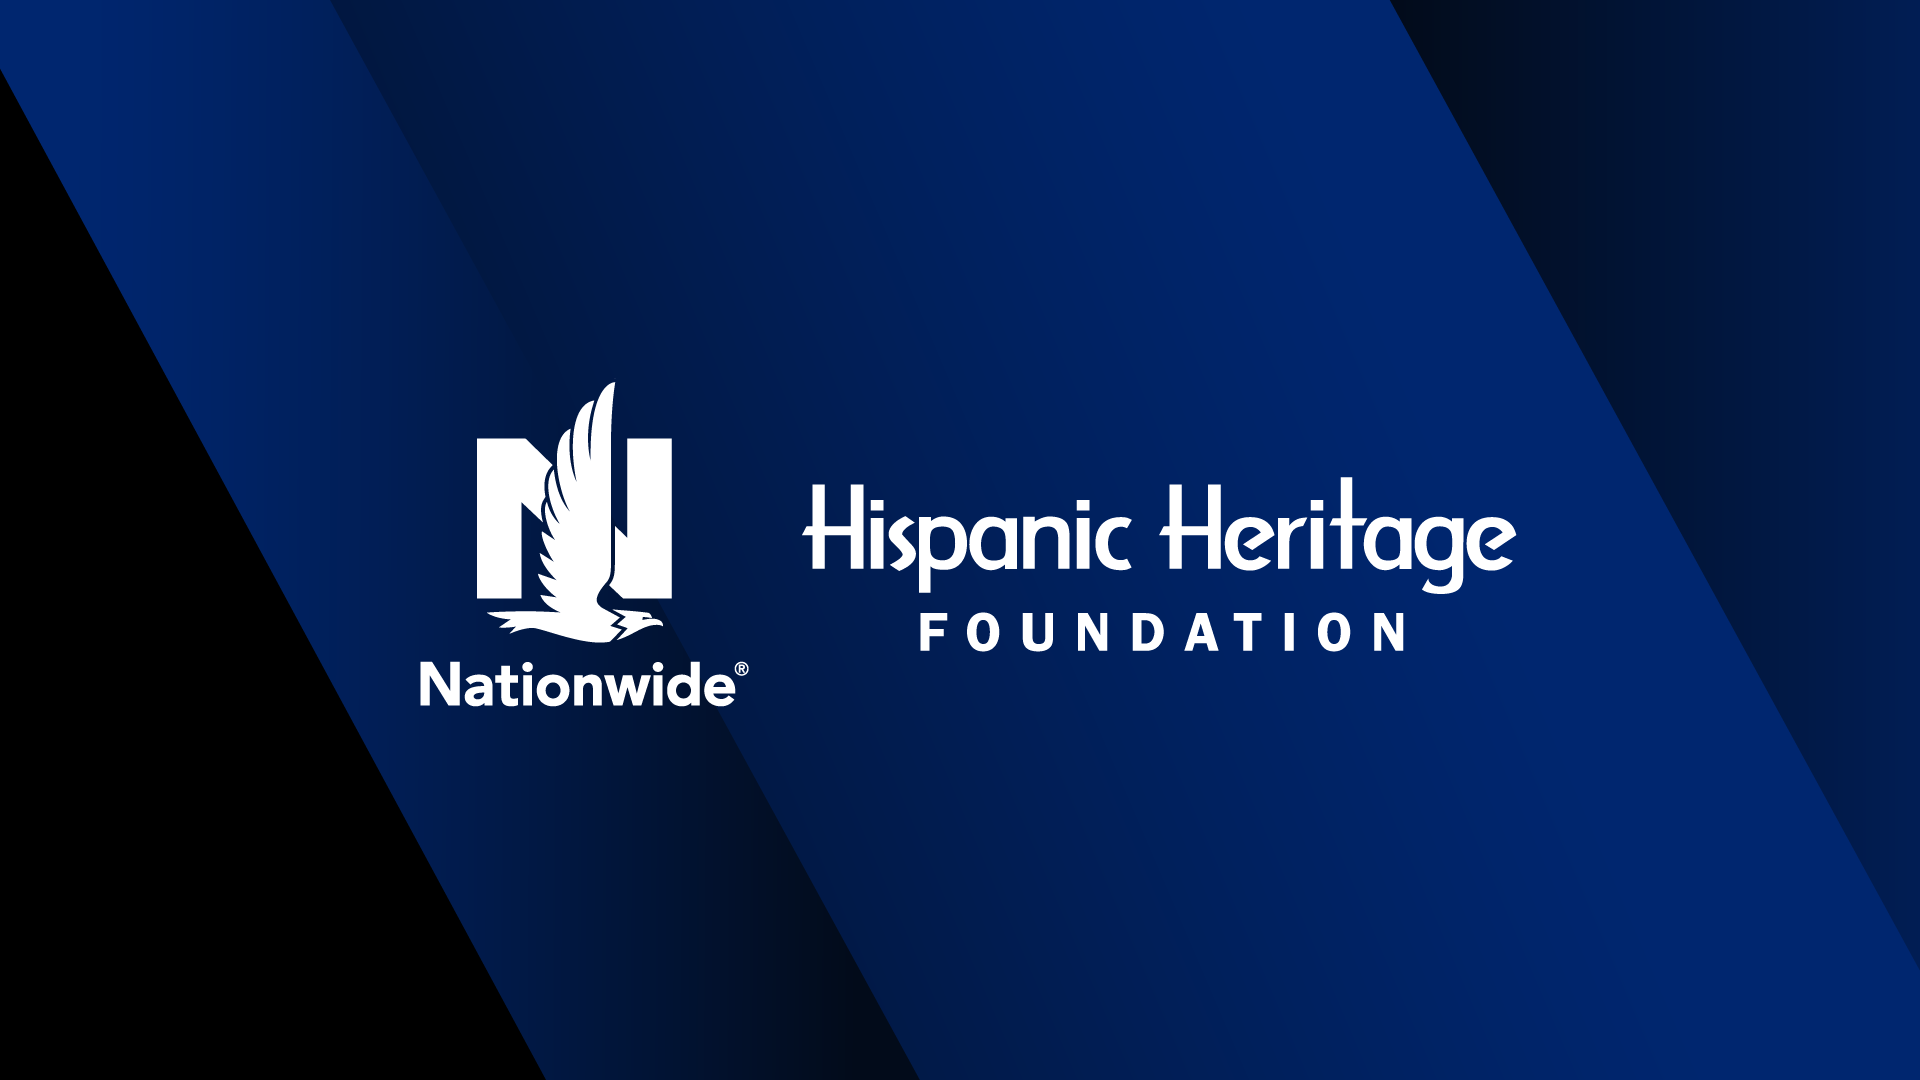 Nationwide announced as Broadcast Sponsor and Medallion Presenter of the 34th Annual Hispanic Heritage Awards